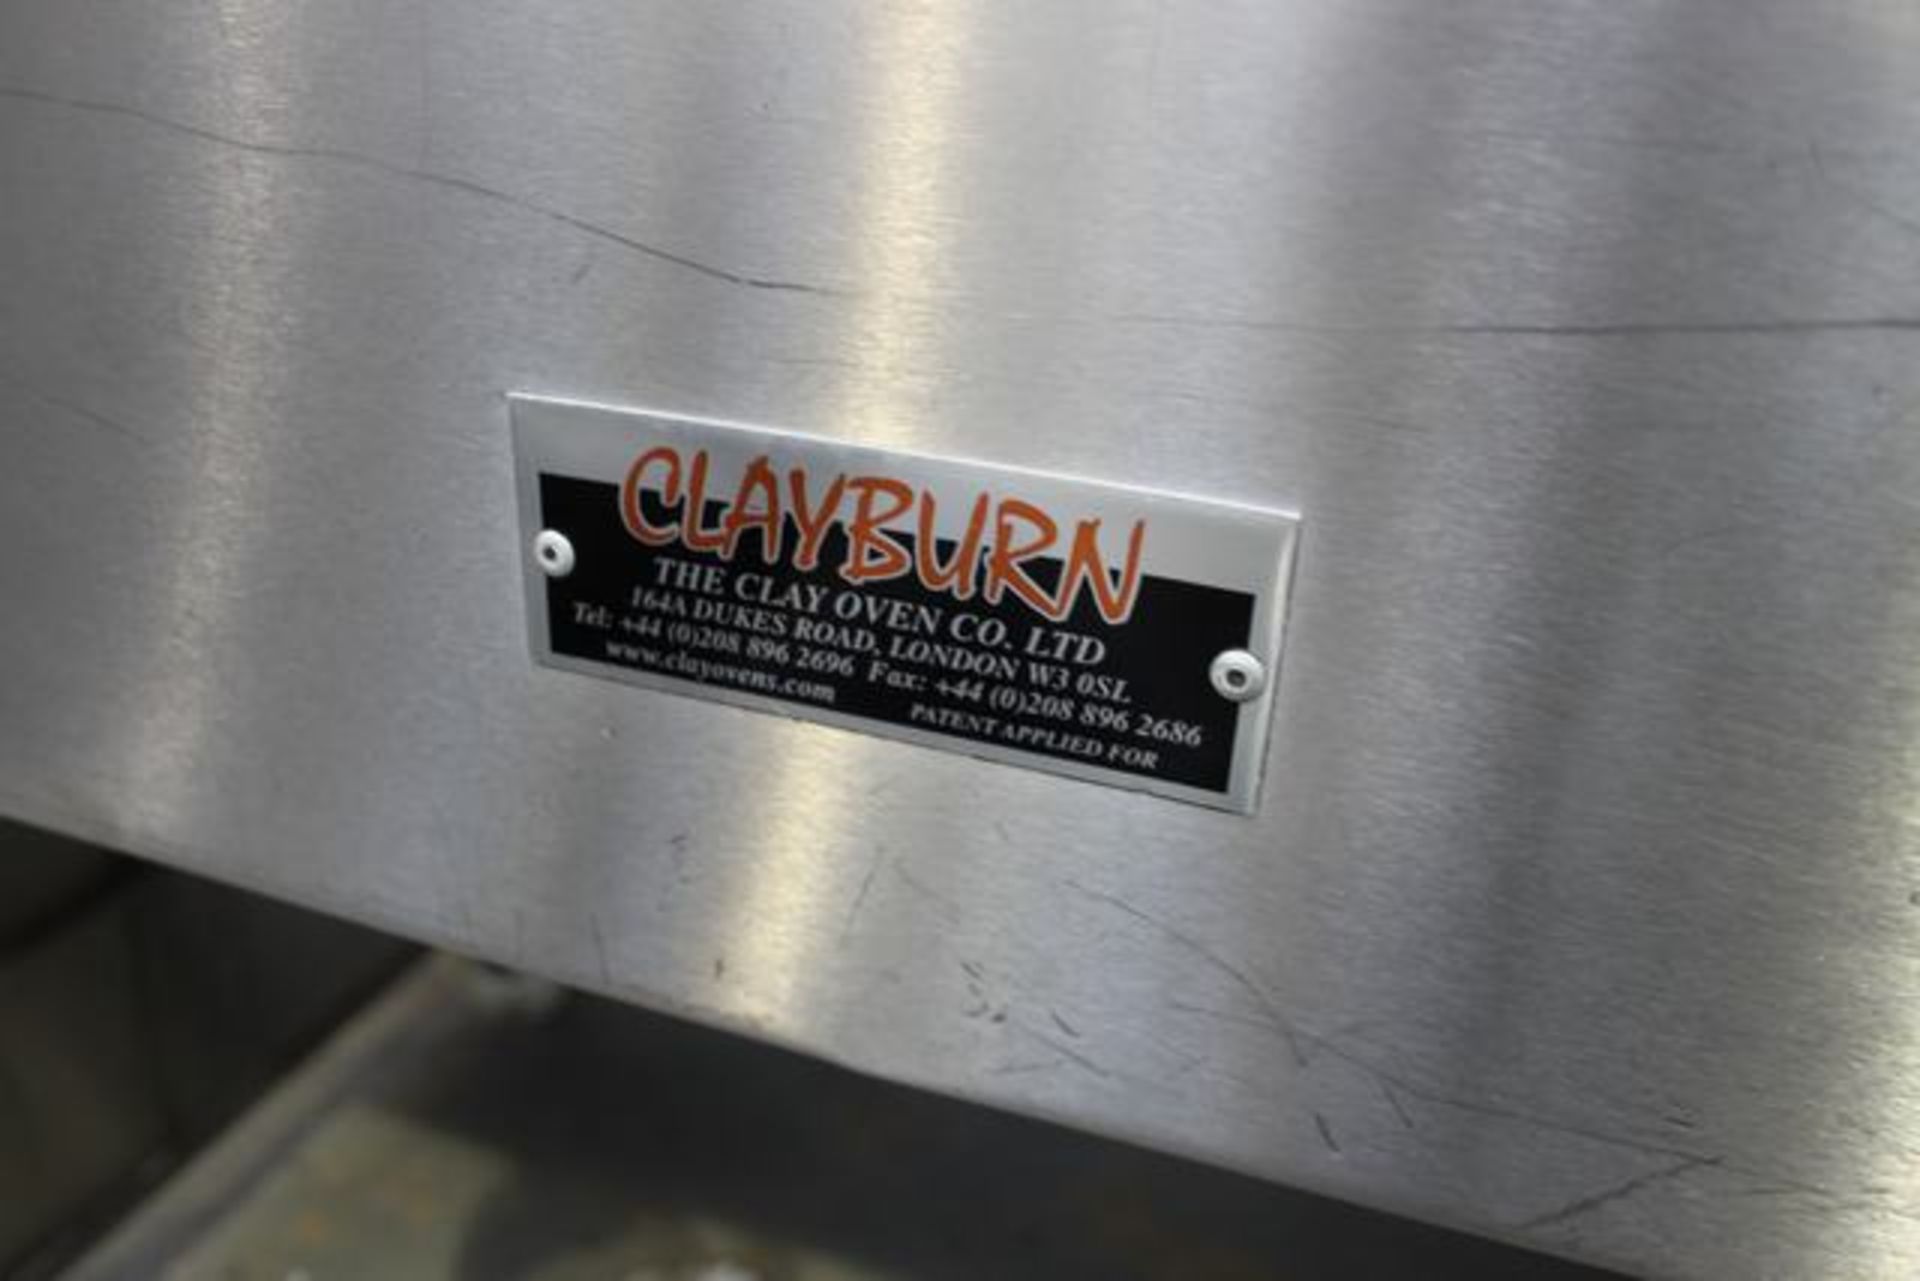 Clayburn 86-AS-488 gas pizza oven 1600mm x 200mm x 700mm deep temperature high Setting 26.5kw / 86, - Image 5 of 5